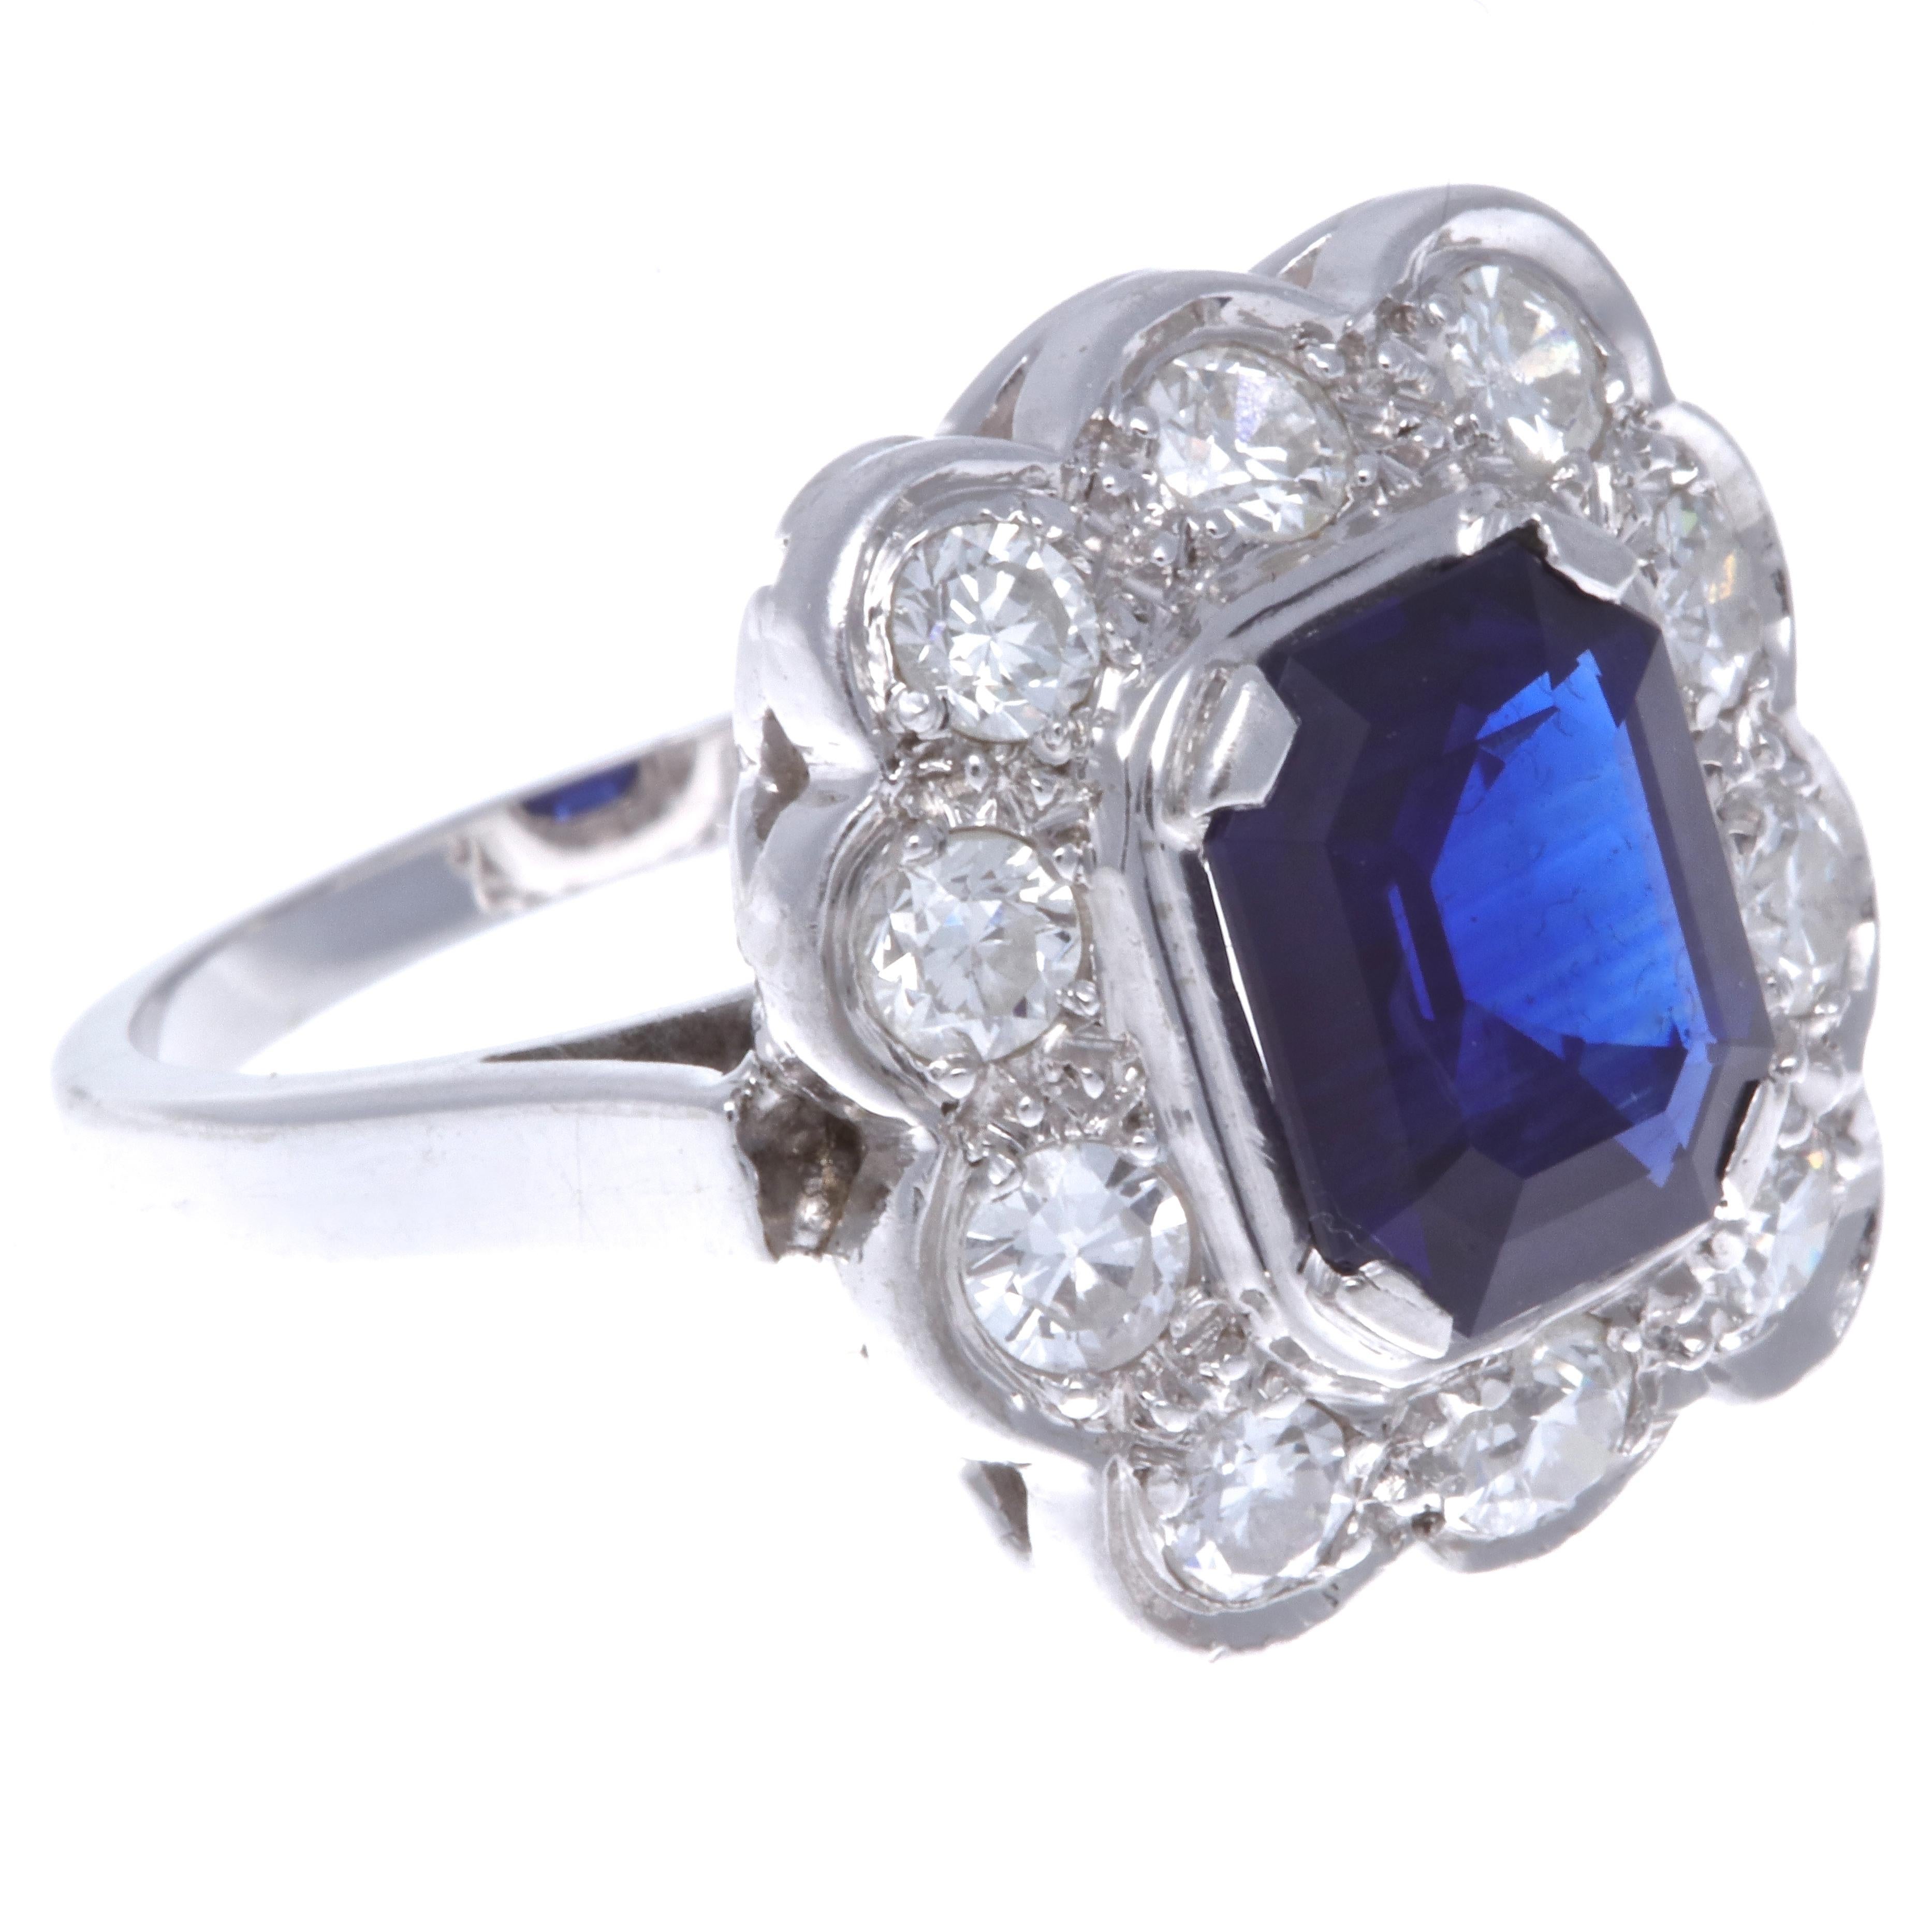 What a beautiful, yet powerful Art Deco Style Diamond 18k white Gold Cluster/Flower Motif Ring. A perfect accessory to brighten your day. This rectangular emerald cut sapphire is approximately 2.50 carats, and it adds a unique look to the cluster